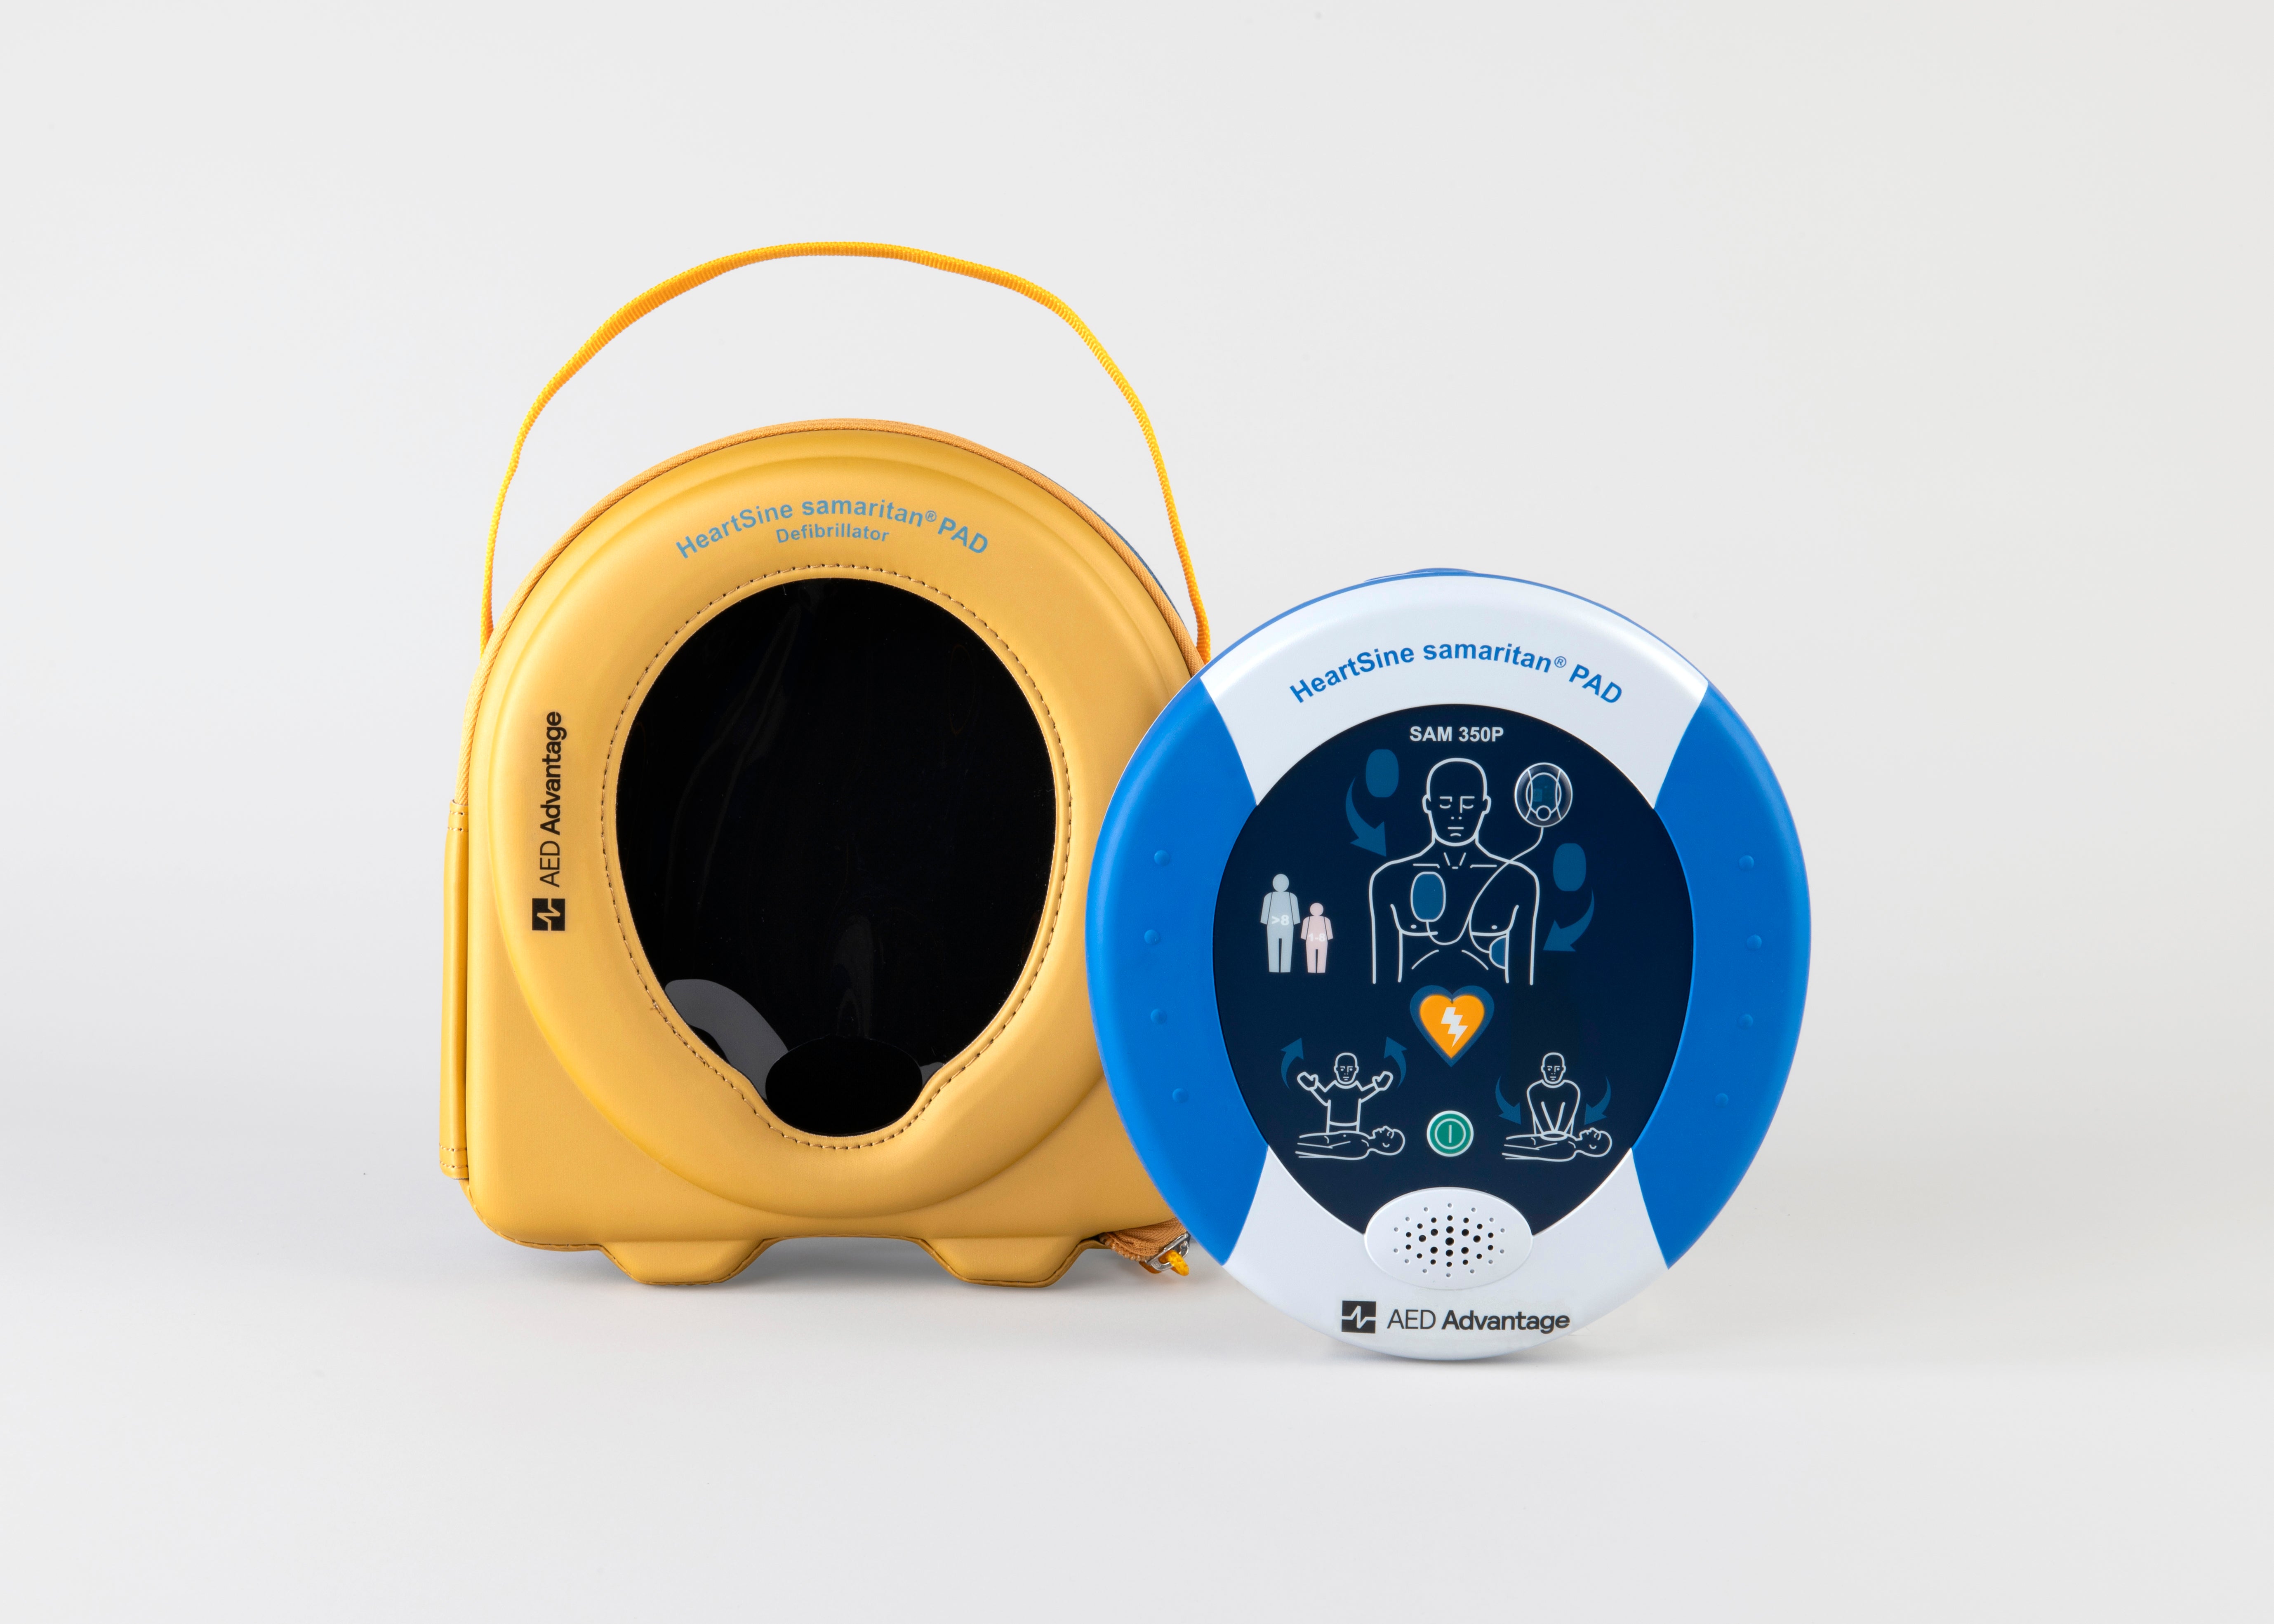 A blue and gray HeartSine 350P AED standing next to its yellow softshell carry case